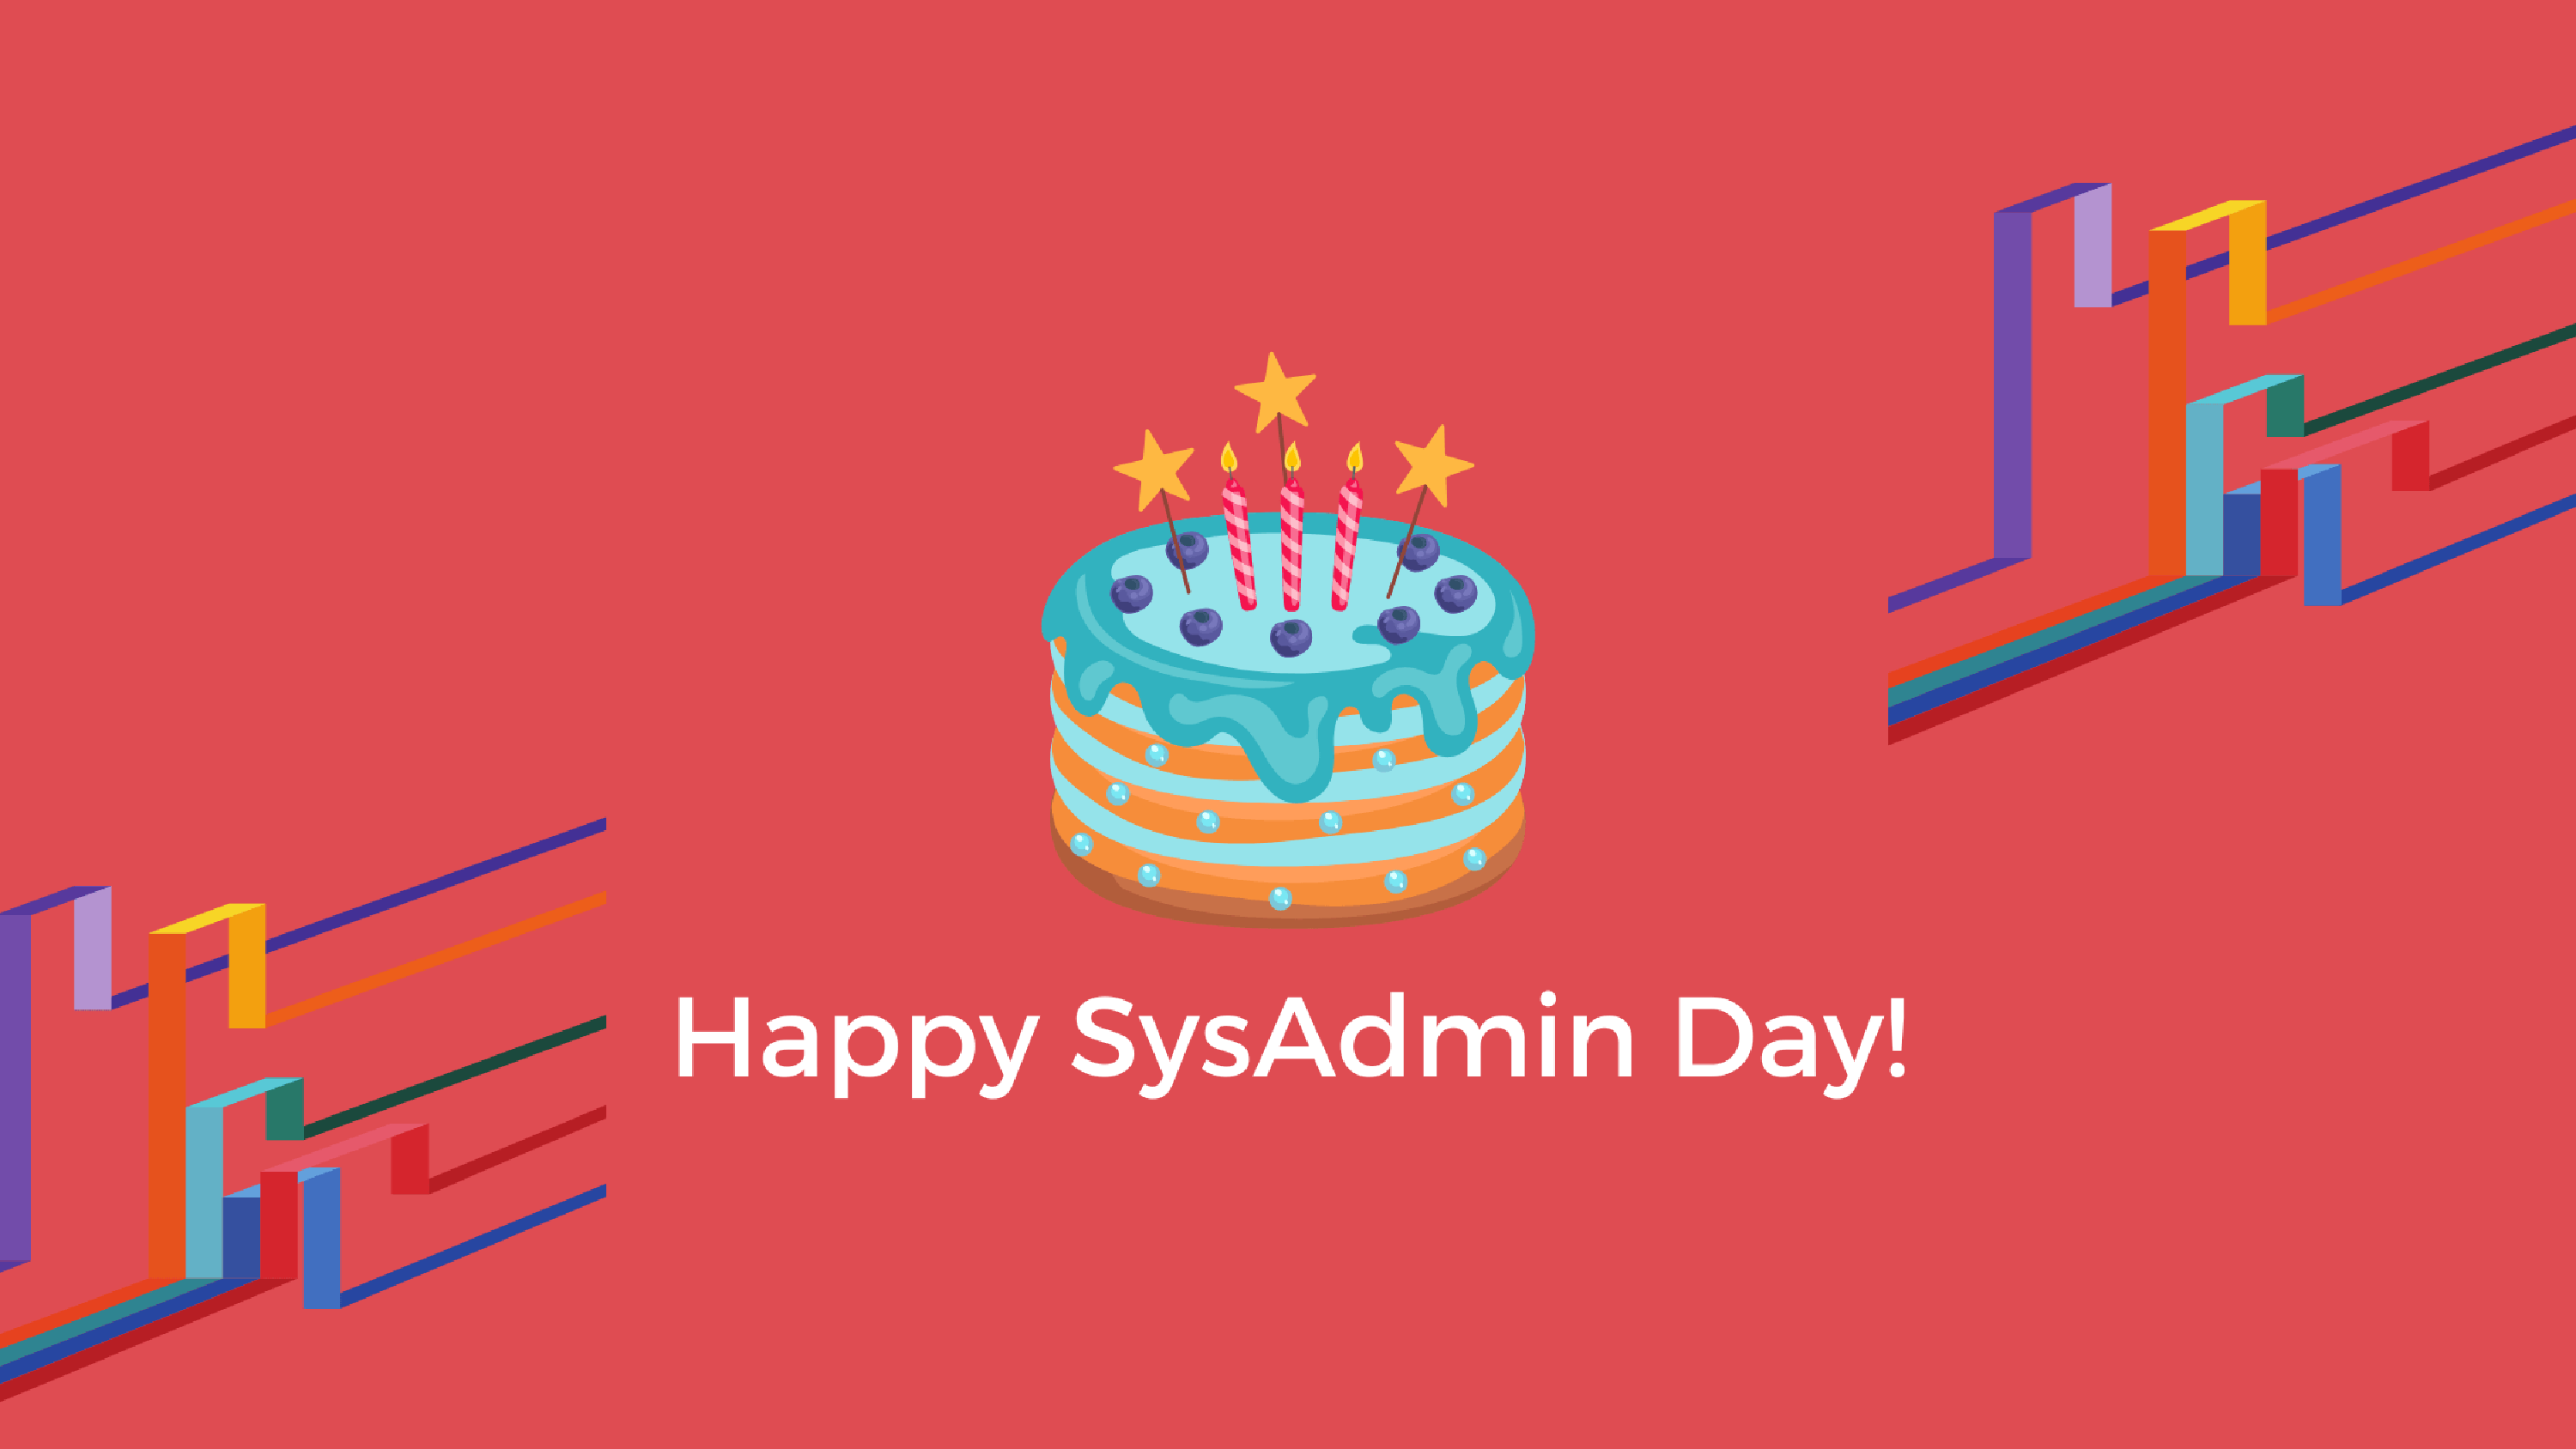 Happy SysAdmin Day! 🥳 Get 15% Off with Dicount Code SYSADMIN